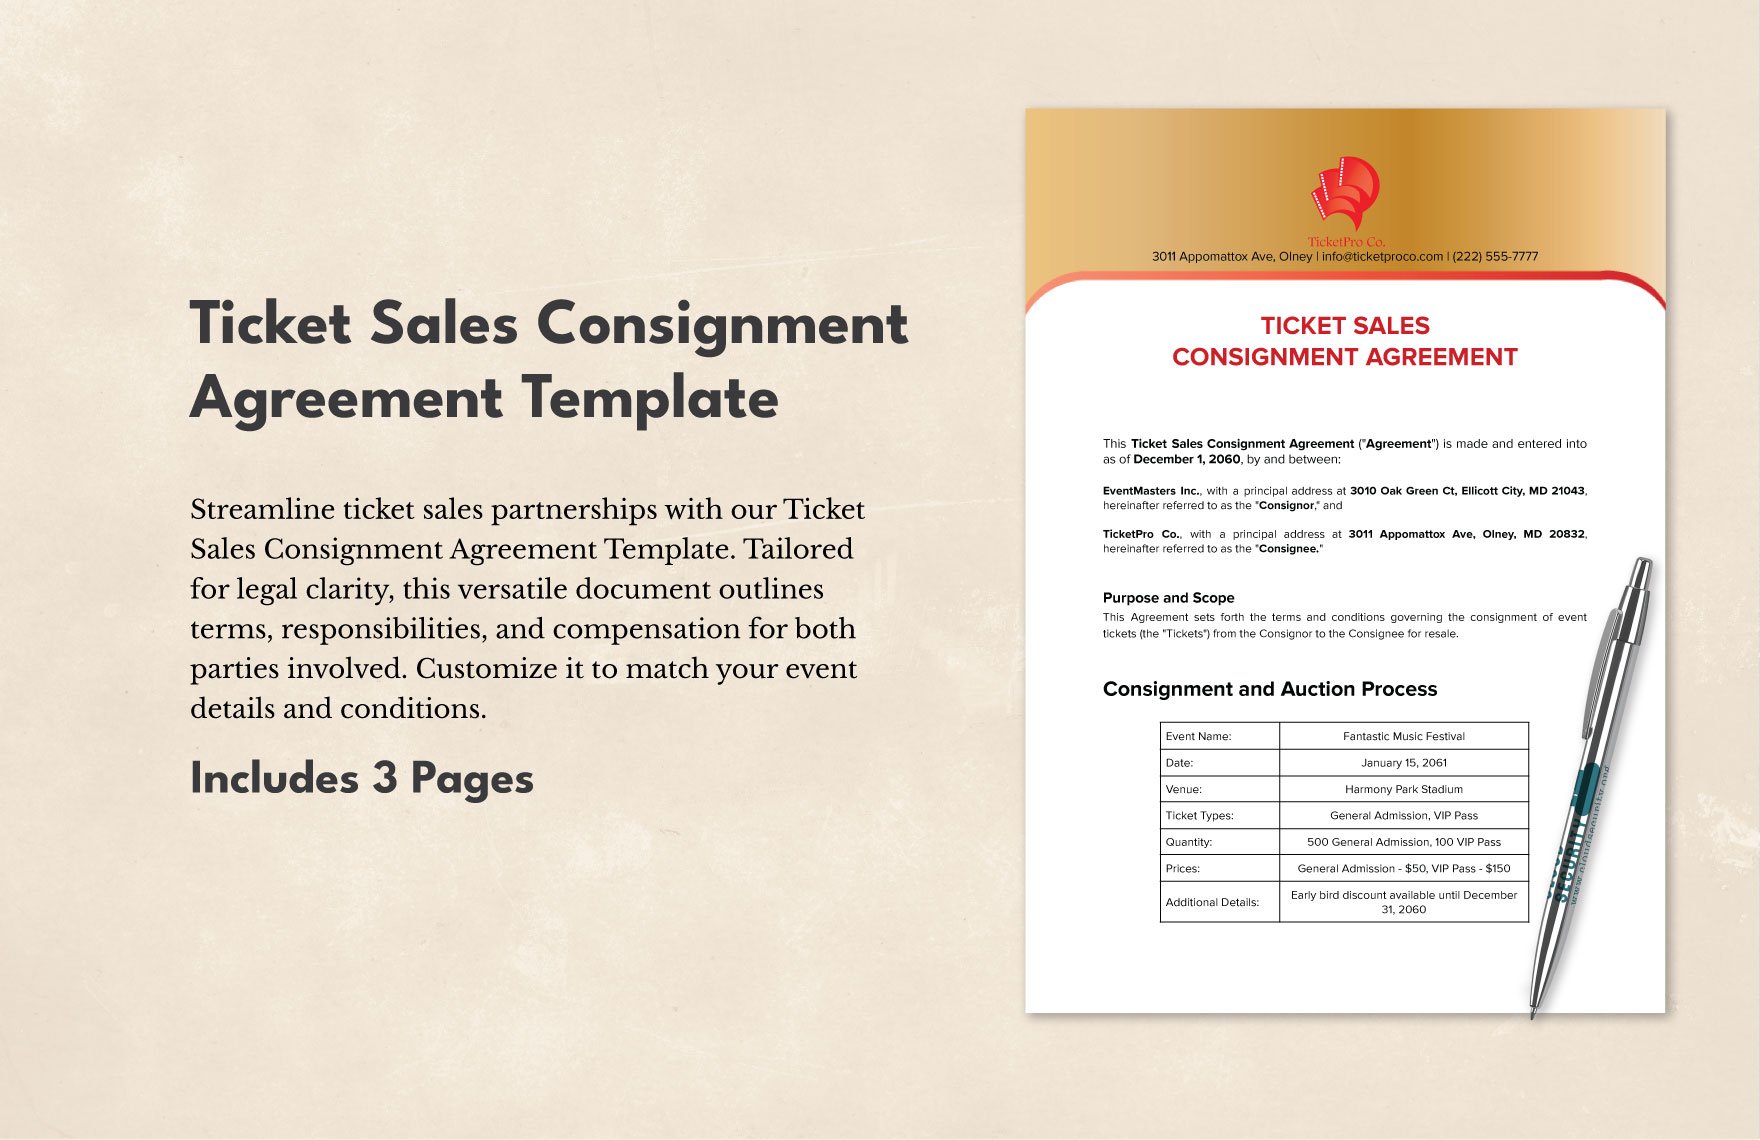 Ticket Sales Consignment Agreement Template